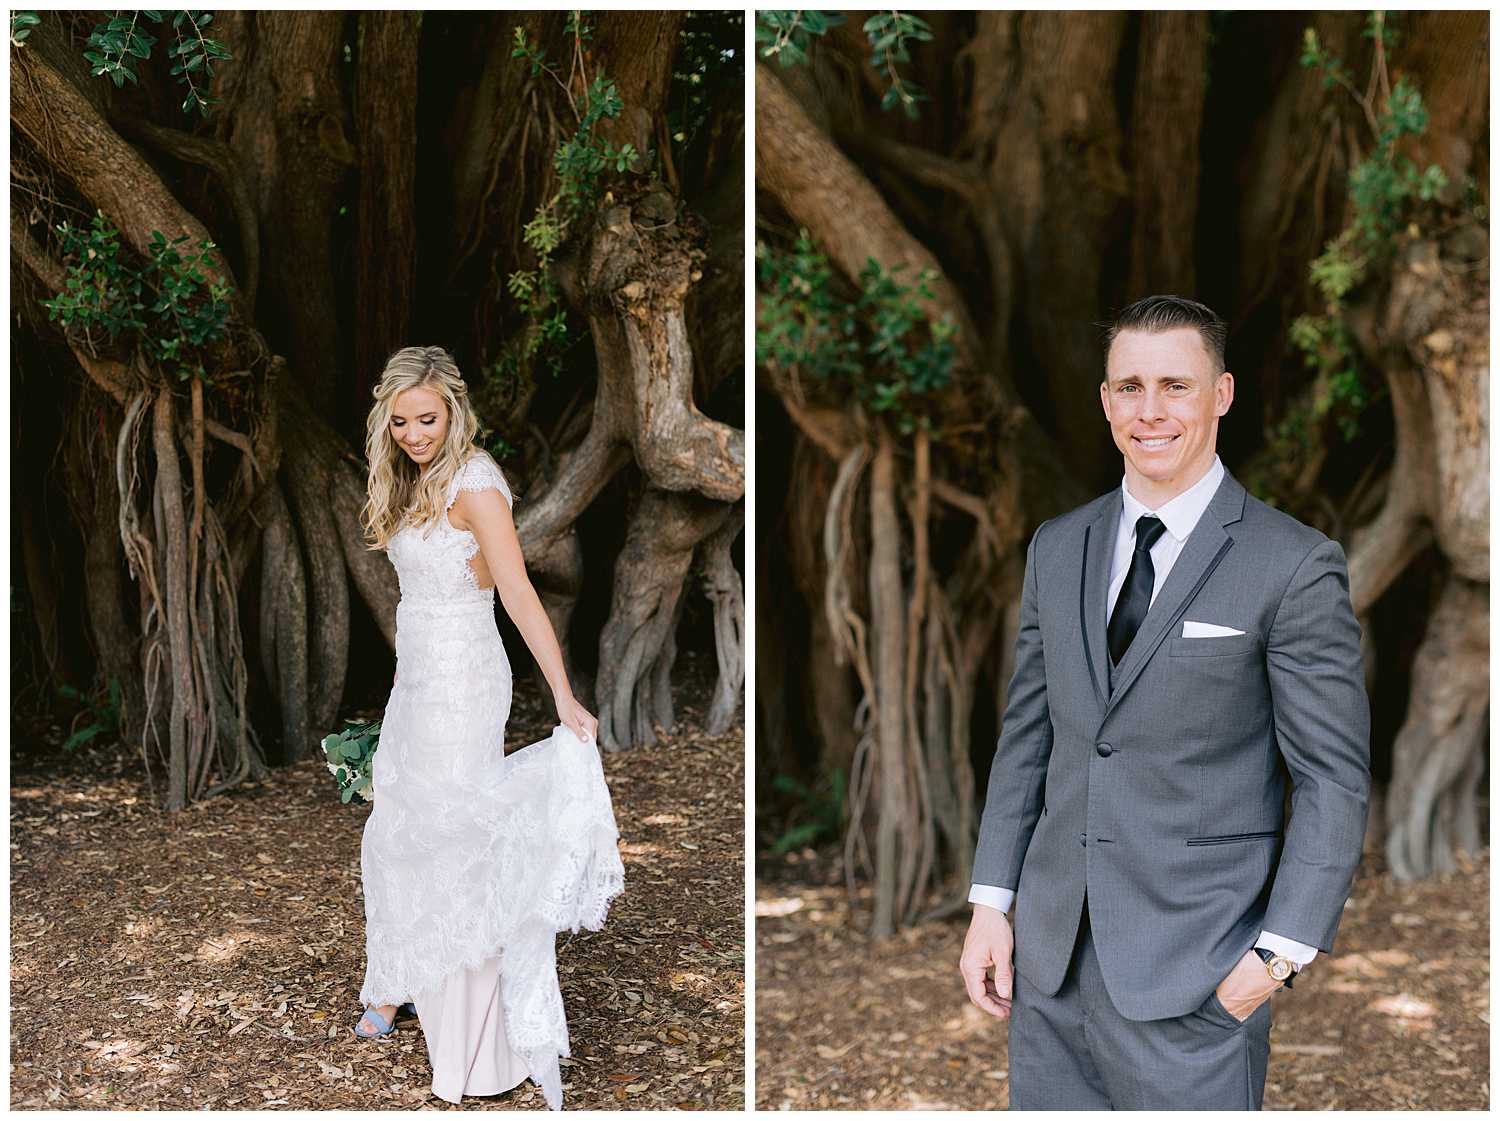 The bride and groom before their botanical garden elopement